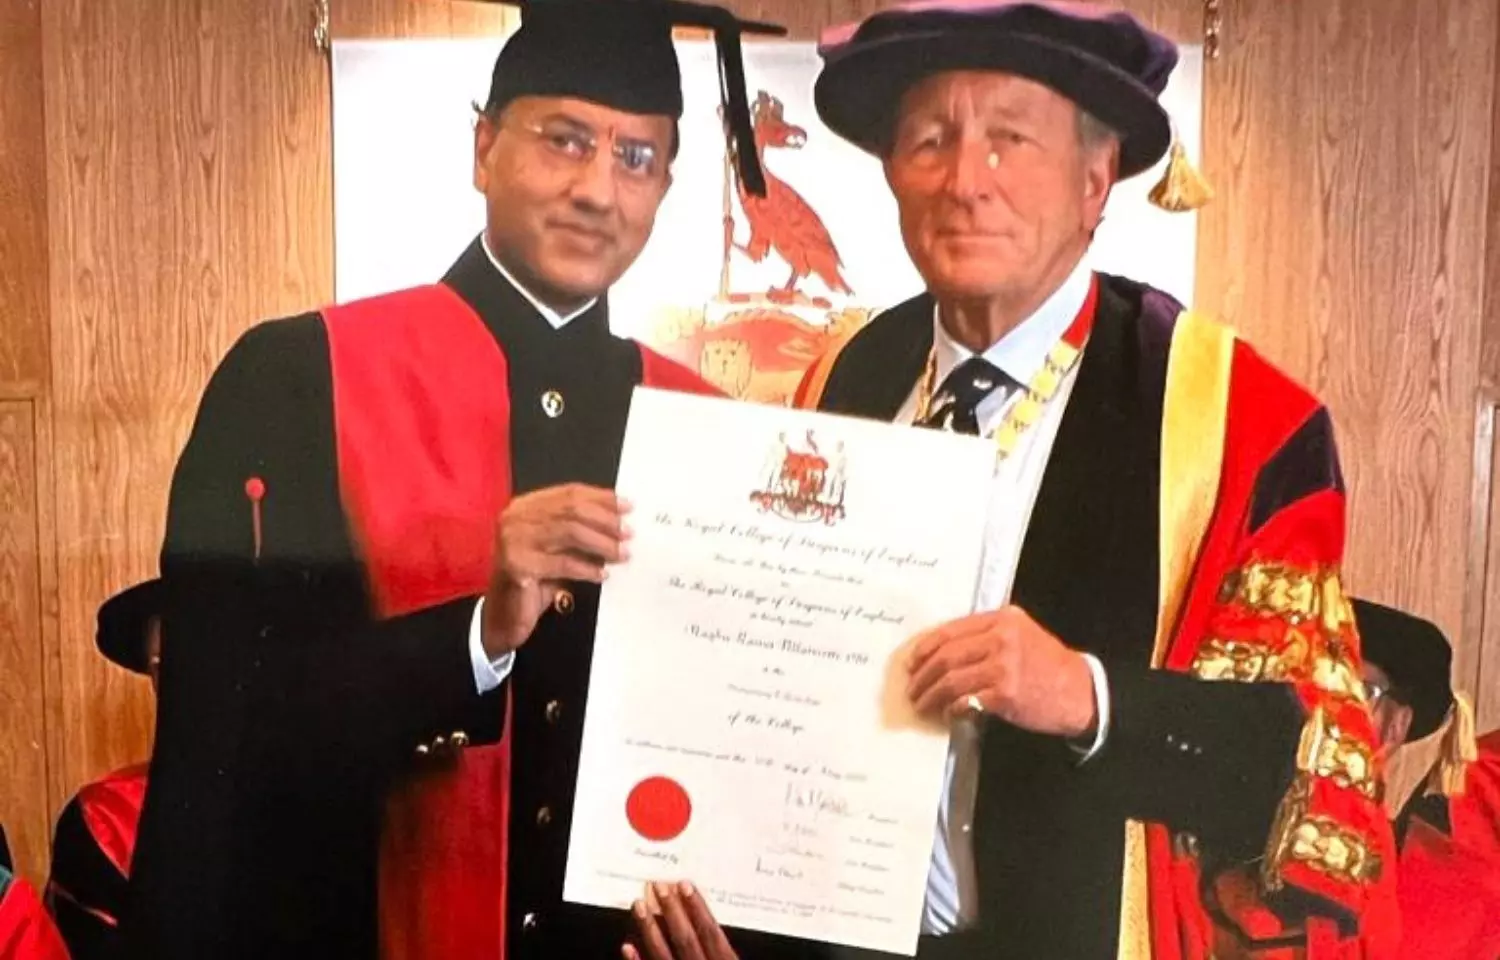 Indian Origin Surgeon Dr P Raghu Ram conferred with Honorary FRCS by The Royal College of Surgeons of England